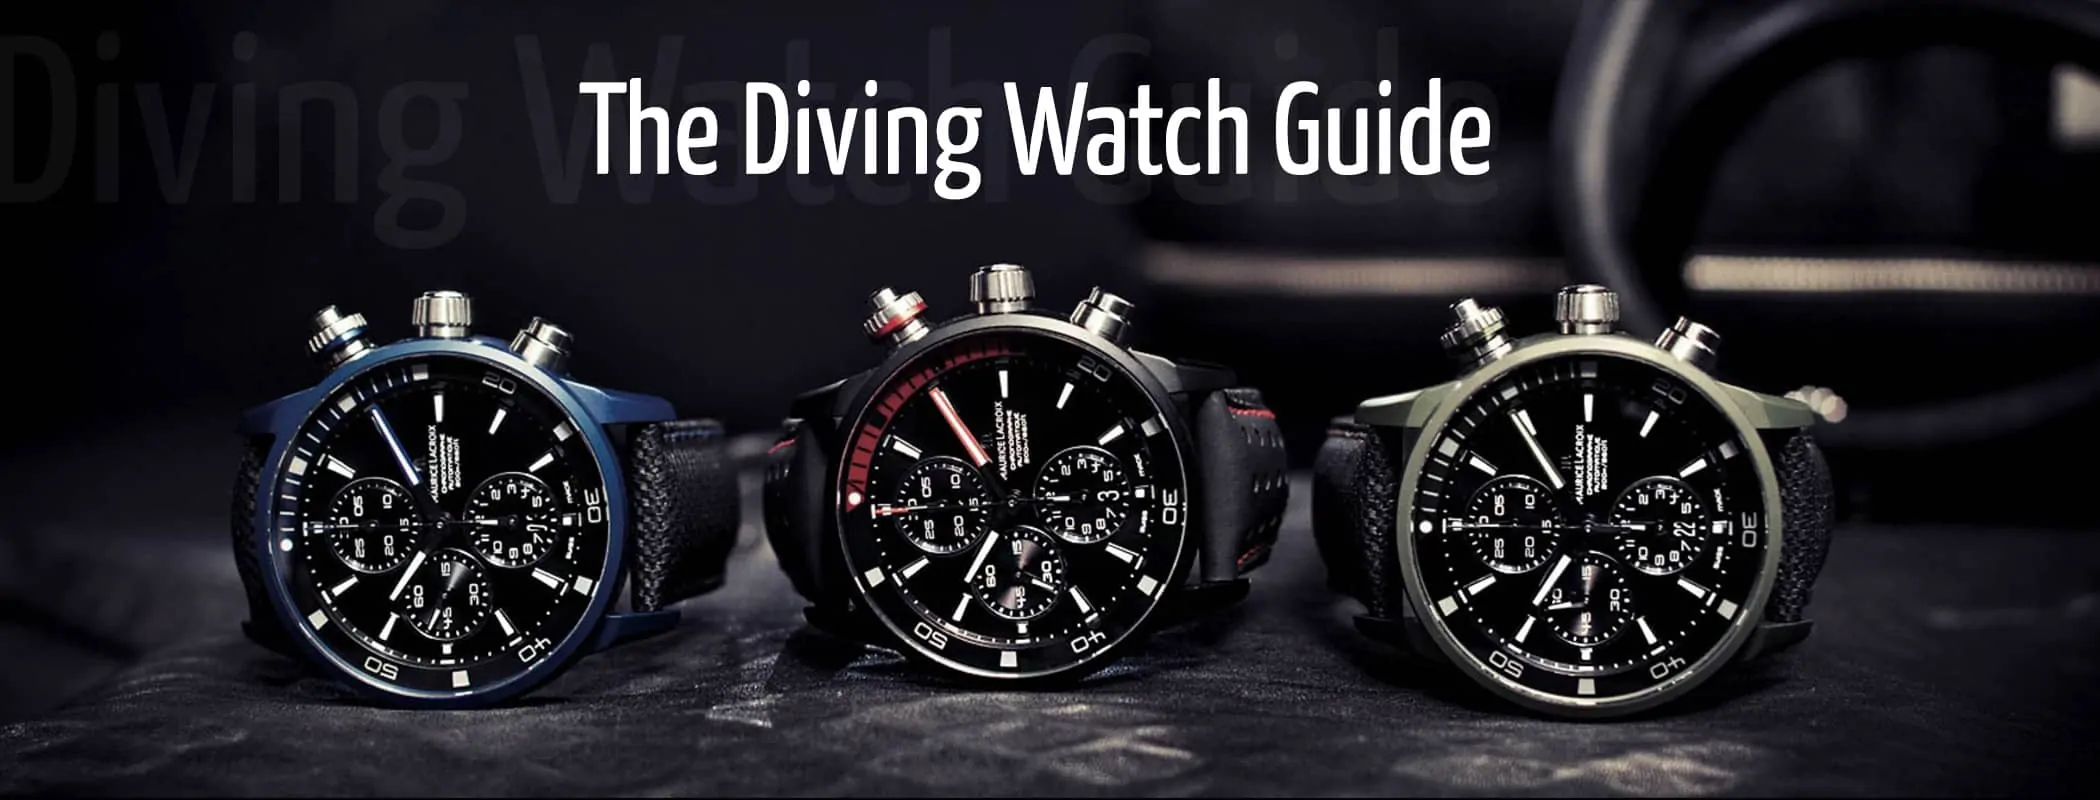 The Diving Watch Guide